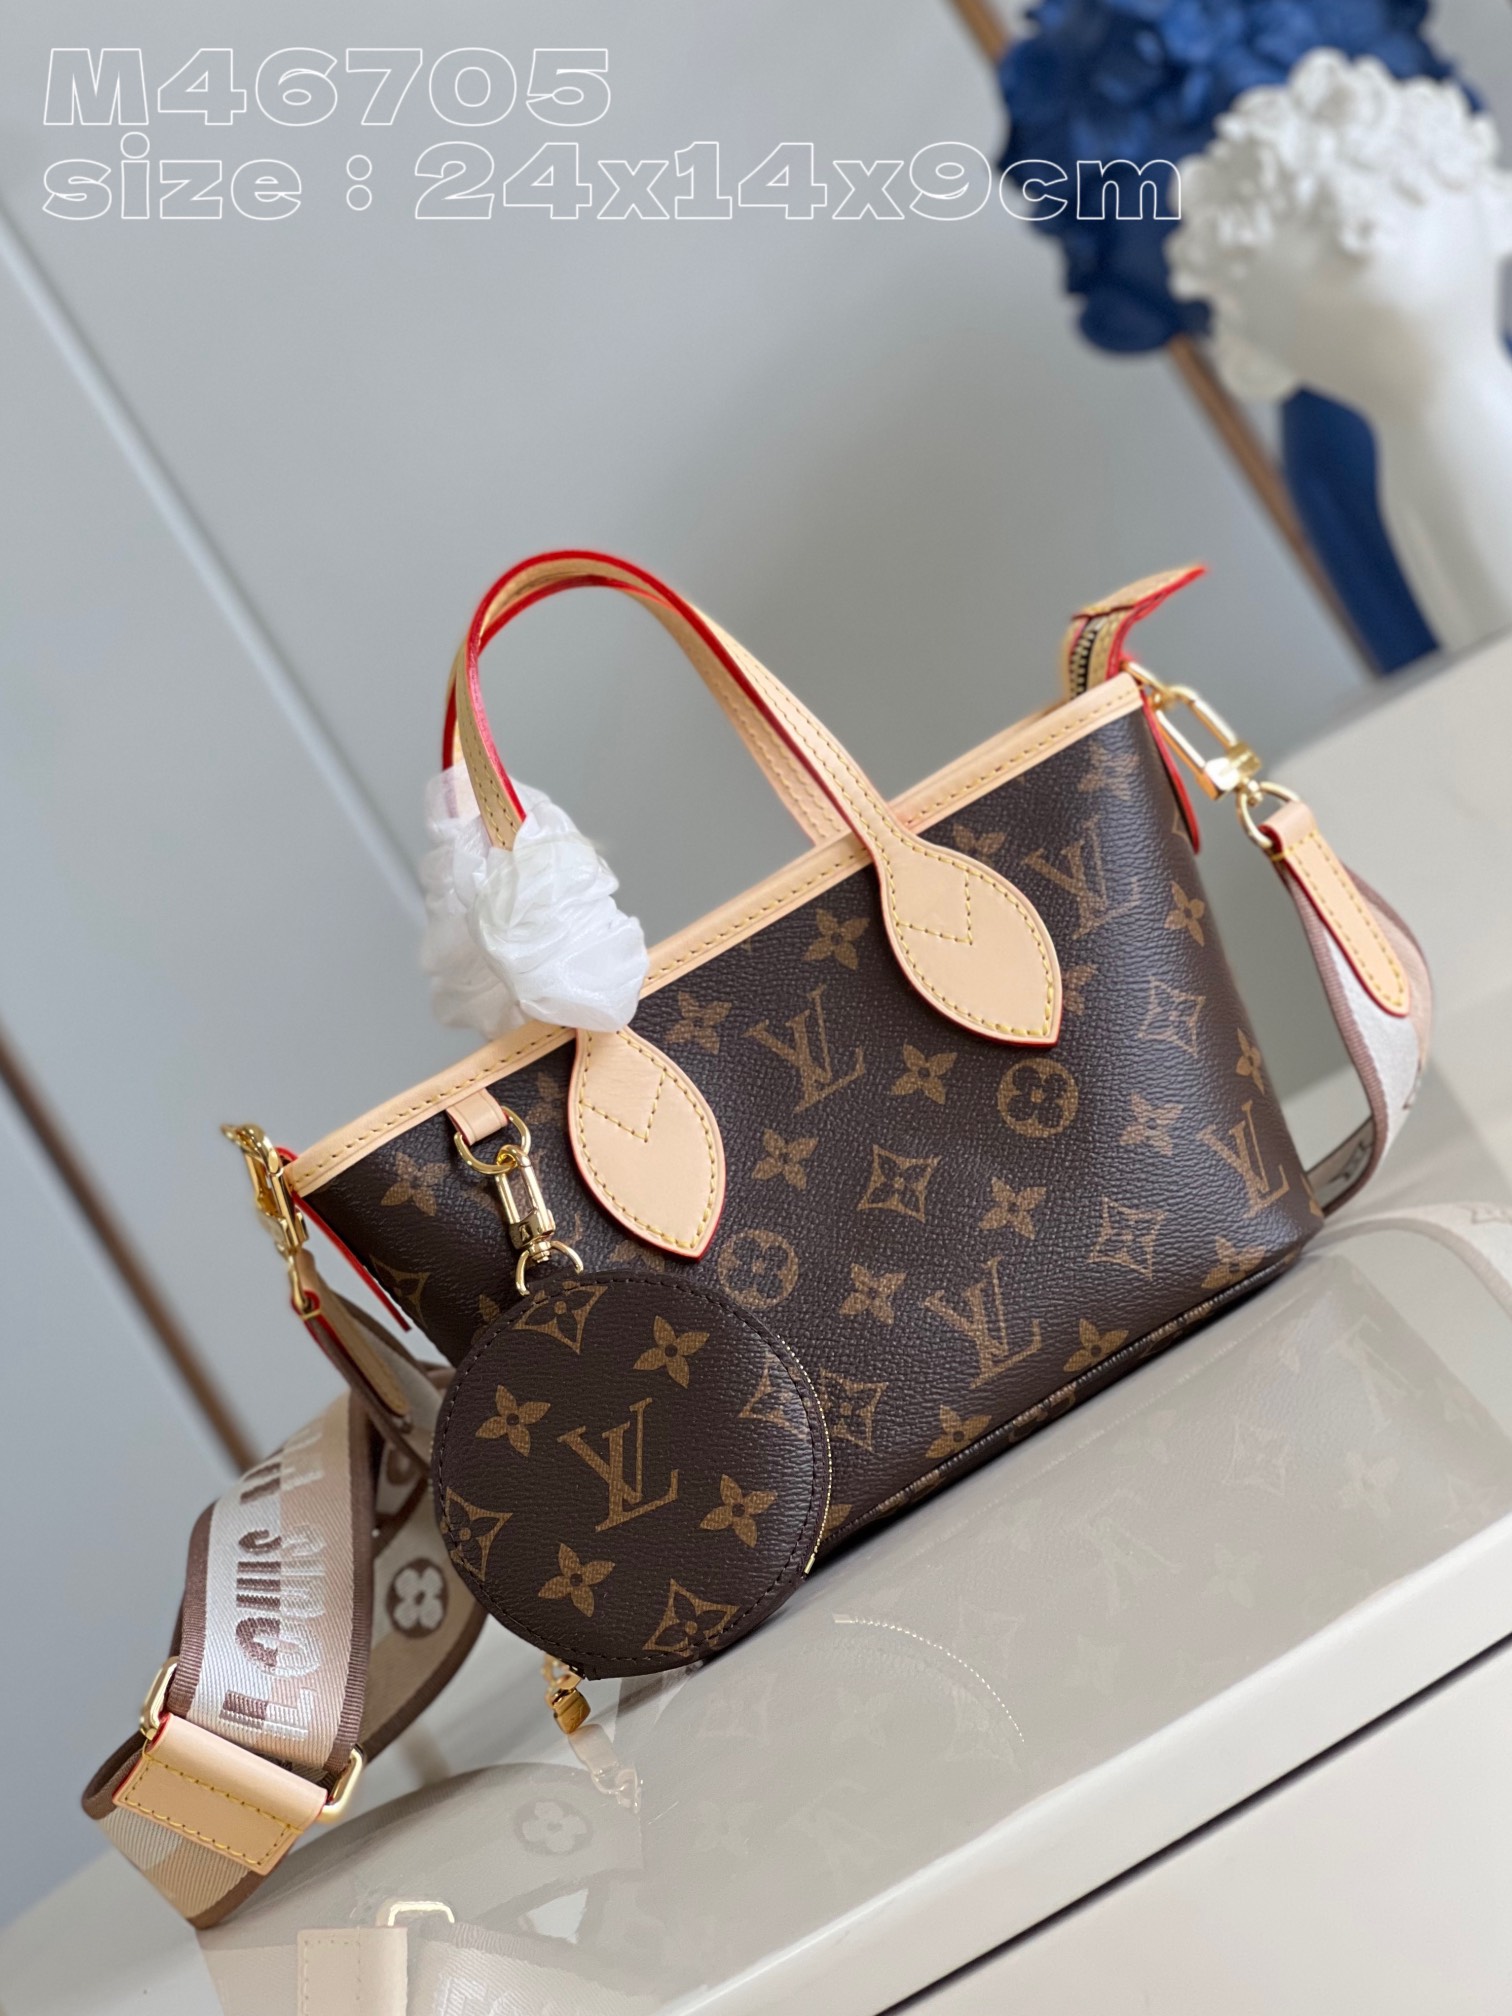 Where to buy fakes Louis Vuitton LV Neverfull Top Bags Handbags Damier Ebene Canvas Cowhide Fabric Casual M46705